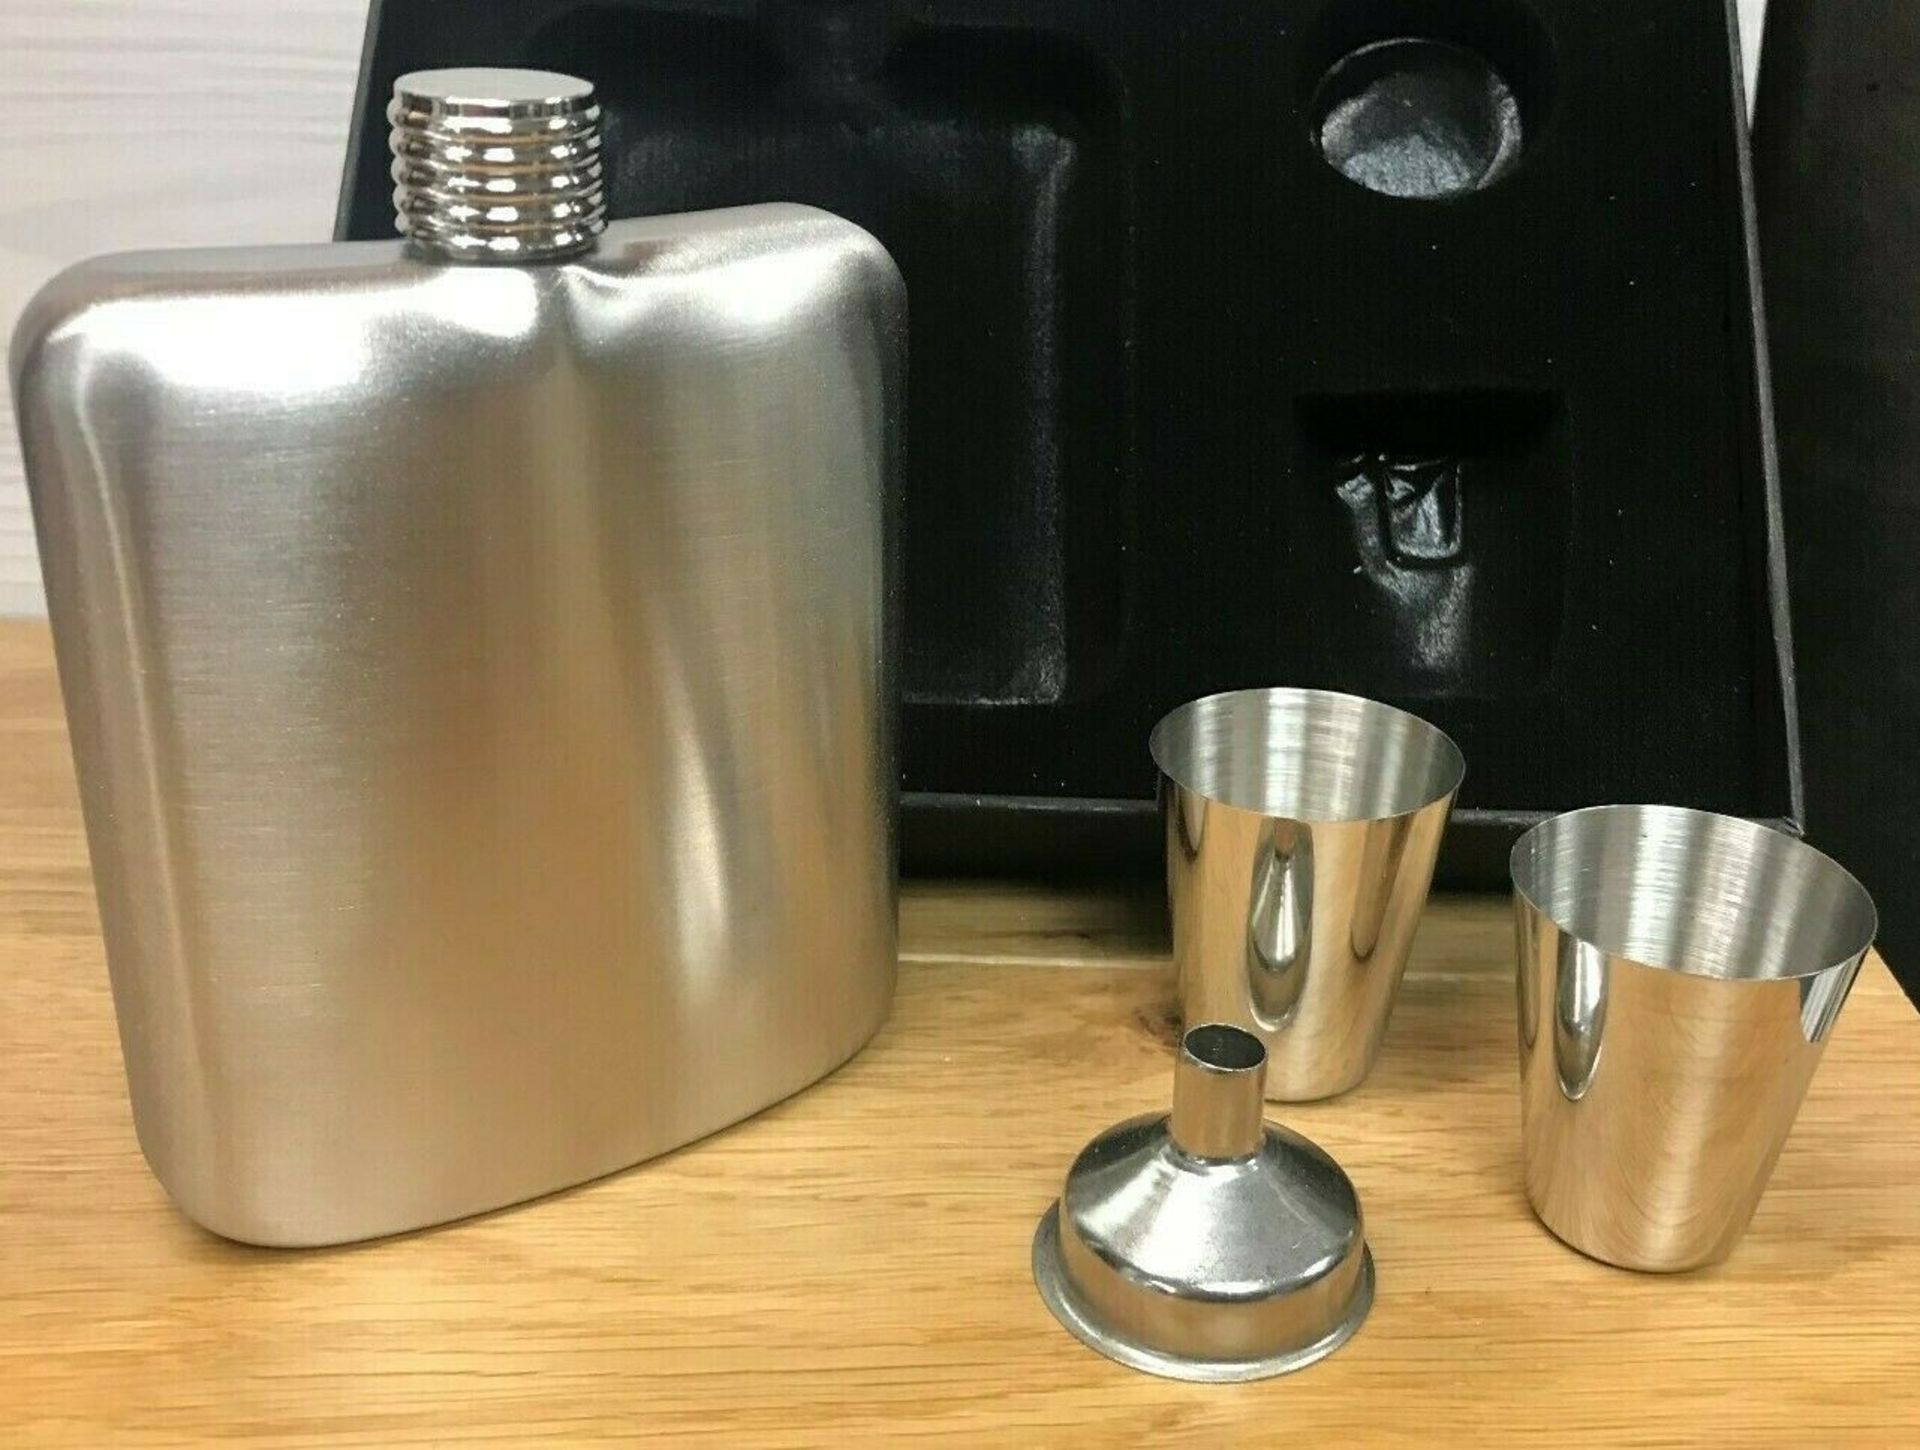 Boxed 6Oz Stainless Steel Hip Flask, Funnel / Pourer plus 2 Shot Cups - 10 Sets Total RRP £125 - Image 4 of 5